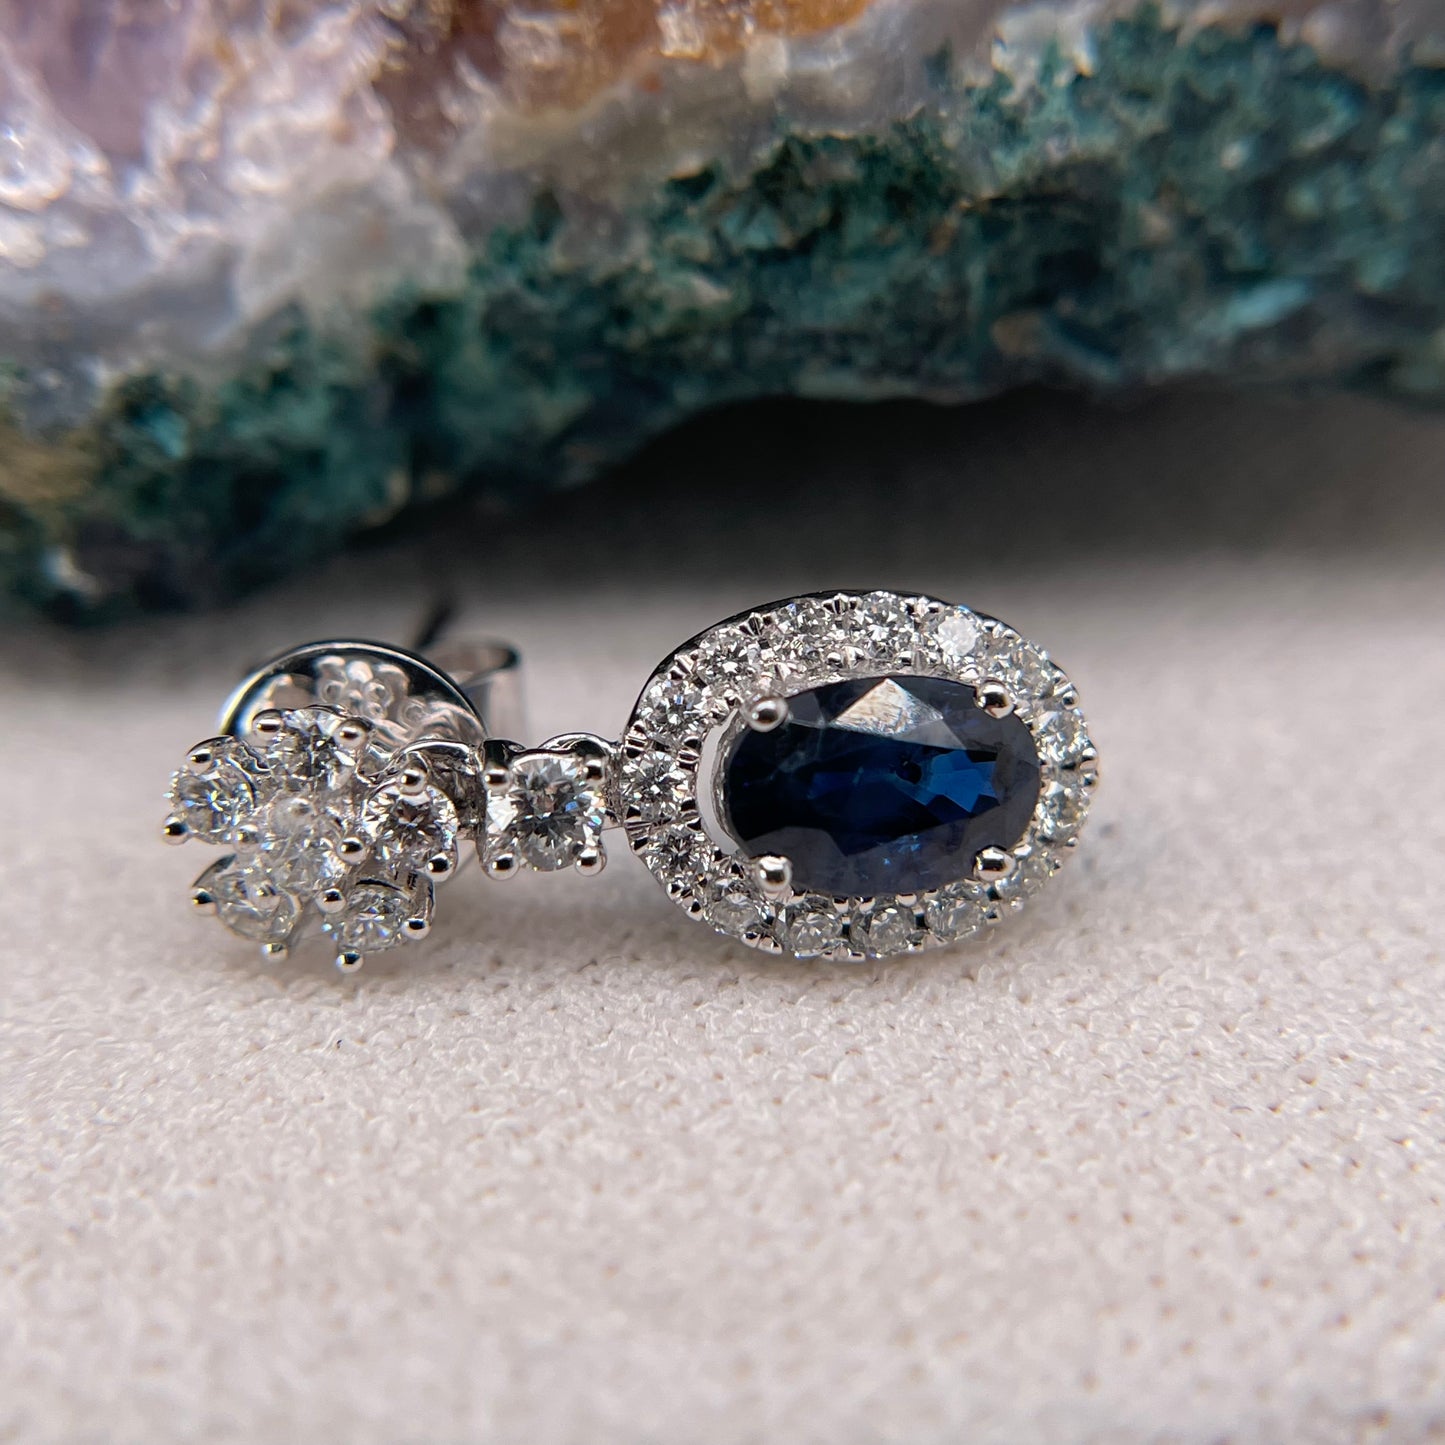 14K White Gold Blue Sapphire Earrings with Diamond